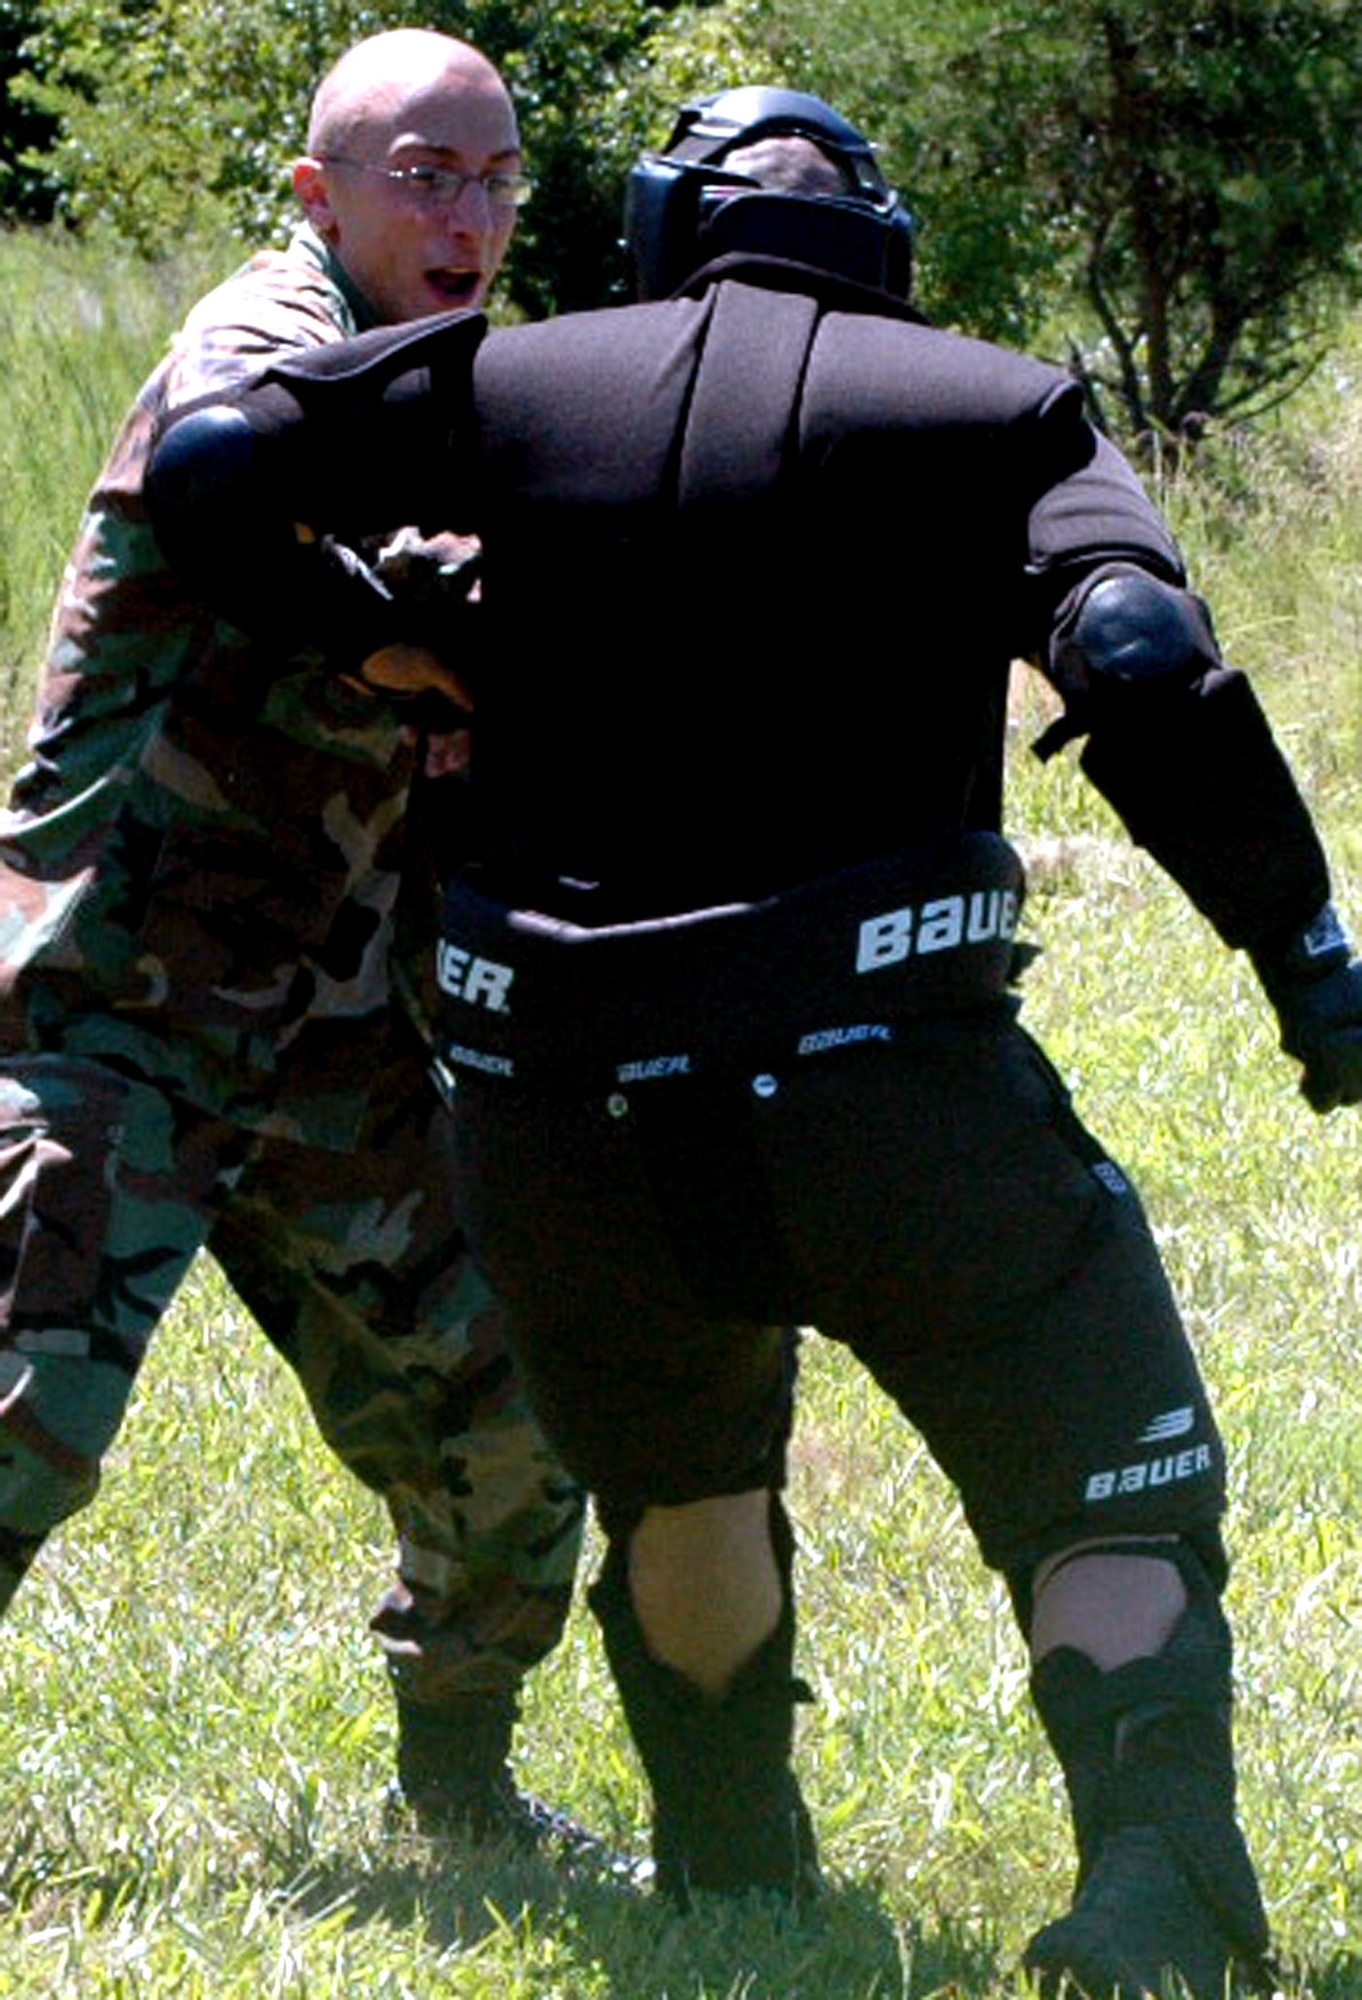 Airman 1st Class Antonio D'Errico, from the 436th Security Forces Squadron, Dover Air Force Base, Del., and a student in the Air Force Phoenix Raven Course, battles an "aggressor" during an evaluation session in the course on a Fort Dix, N.J., range Aug. 20, 2008.  The course, taught by the U.S. Air Force Expeditionary Center's 421st Combat Training Squadron, trains security forces Airmen to become Ravens where they specialize in protecting Air Force aircraft in austere environments.  (U.S. Air Force Photo/Tech. Sgt. Scott T. Sturkol)